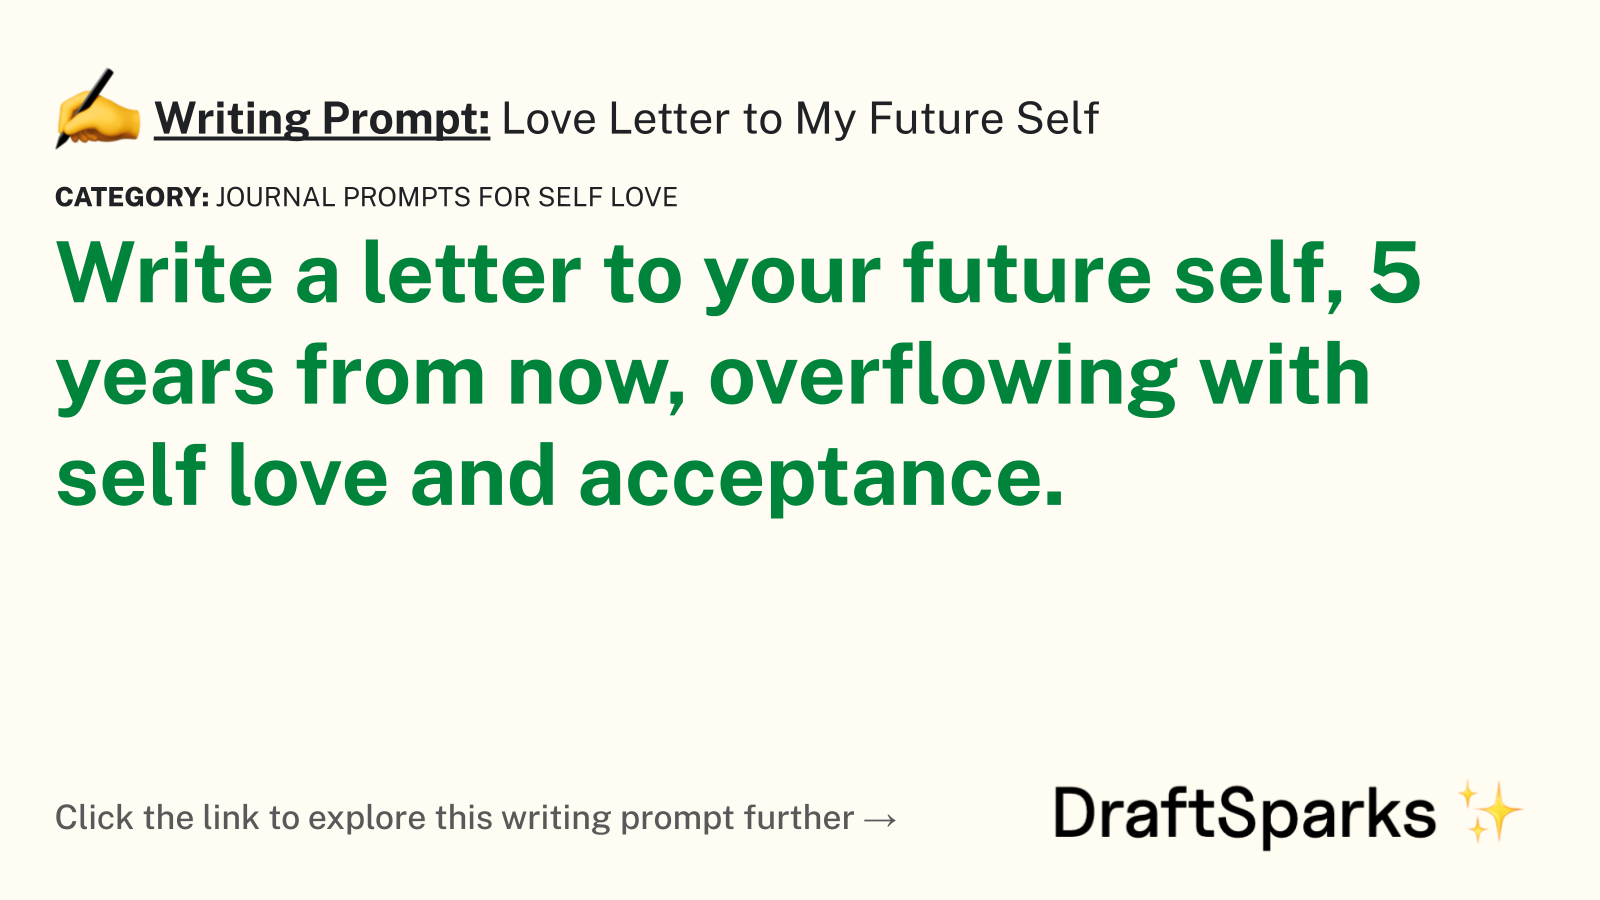 Love Letter to My Future Self